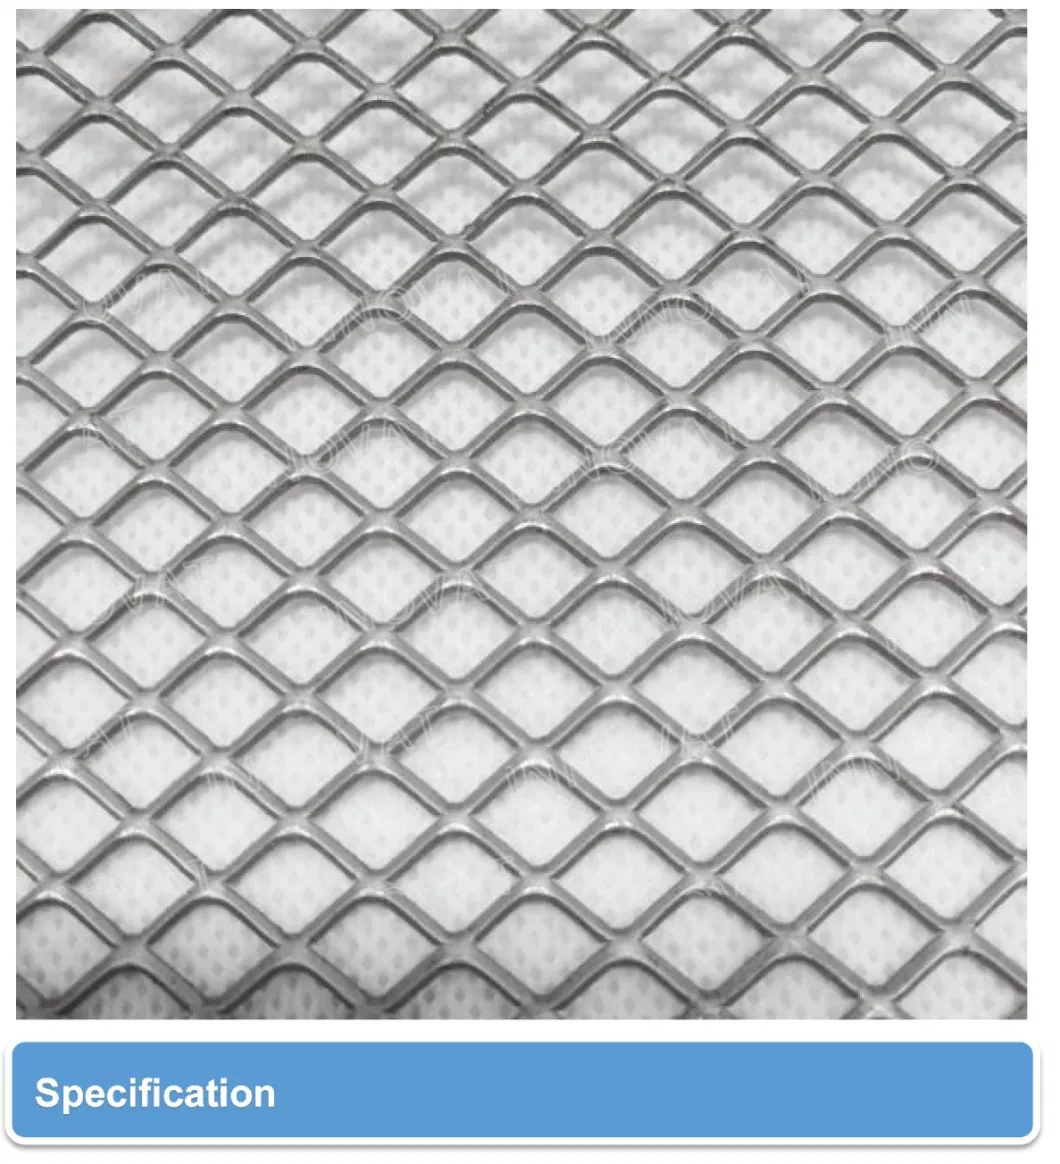 Galvanized Stainless Steel Aluminum Expanded Metal Mesh, Granary Network